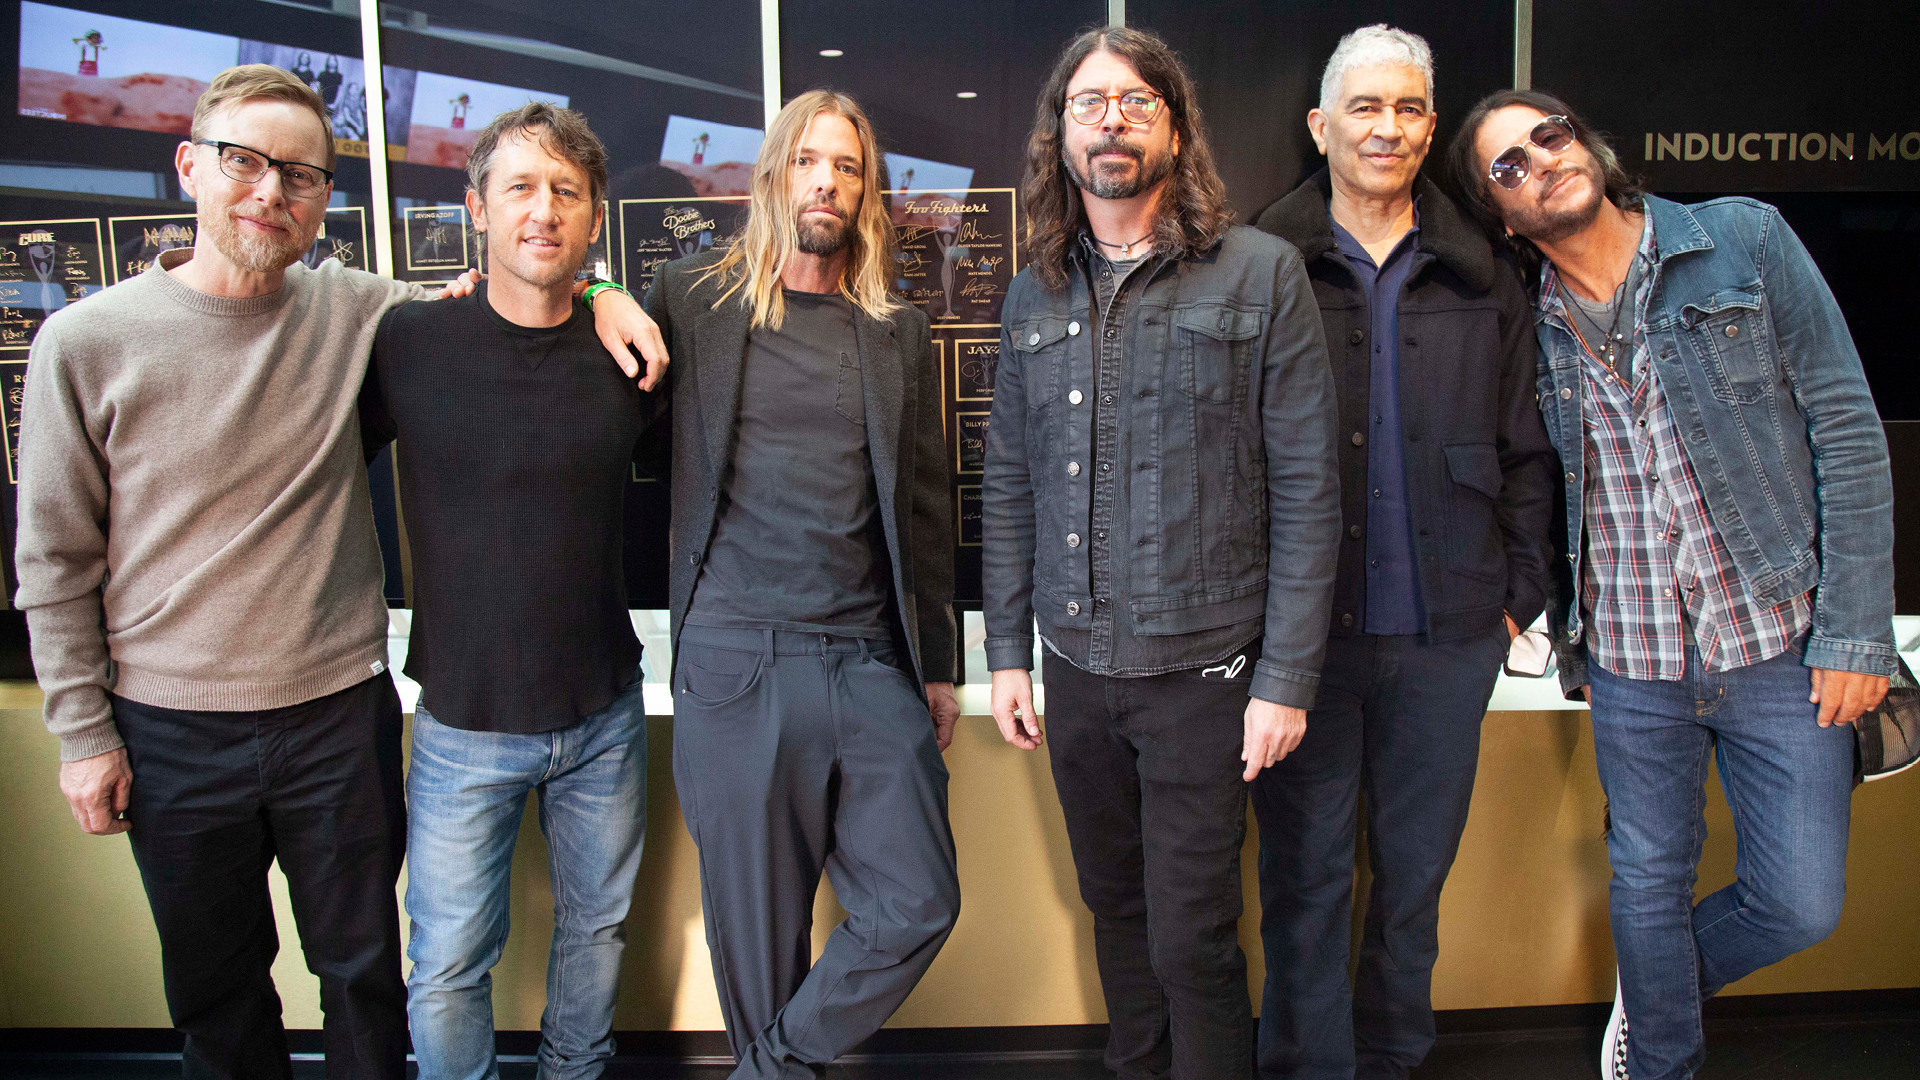 Watch Paul McCartney's induction of Foo Fighters into the Rock